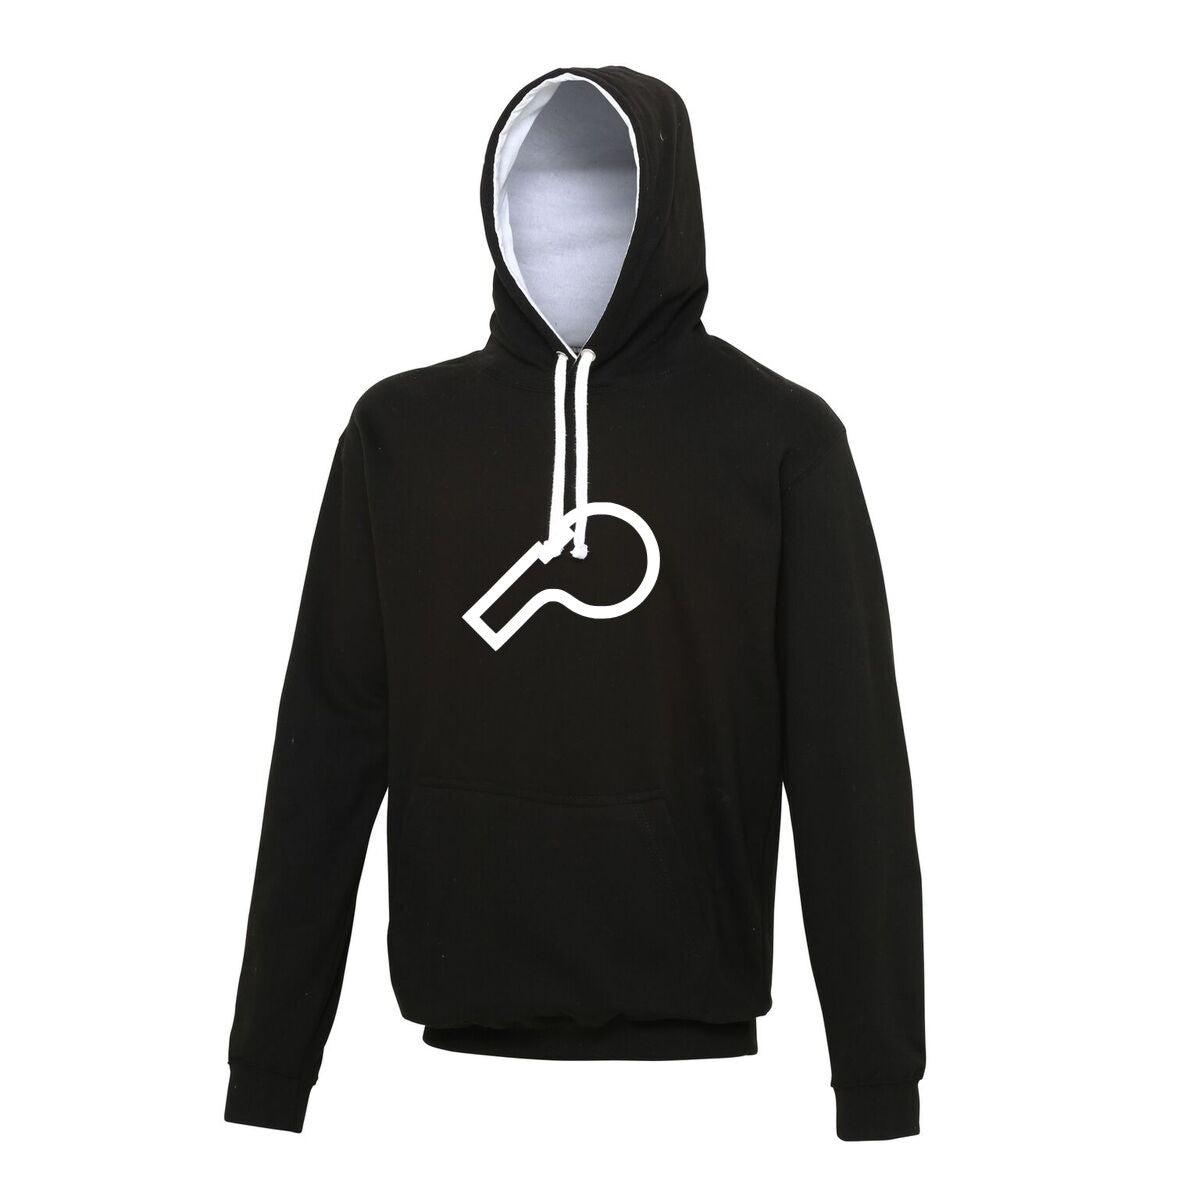 The Whistle Foundation Hoody